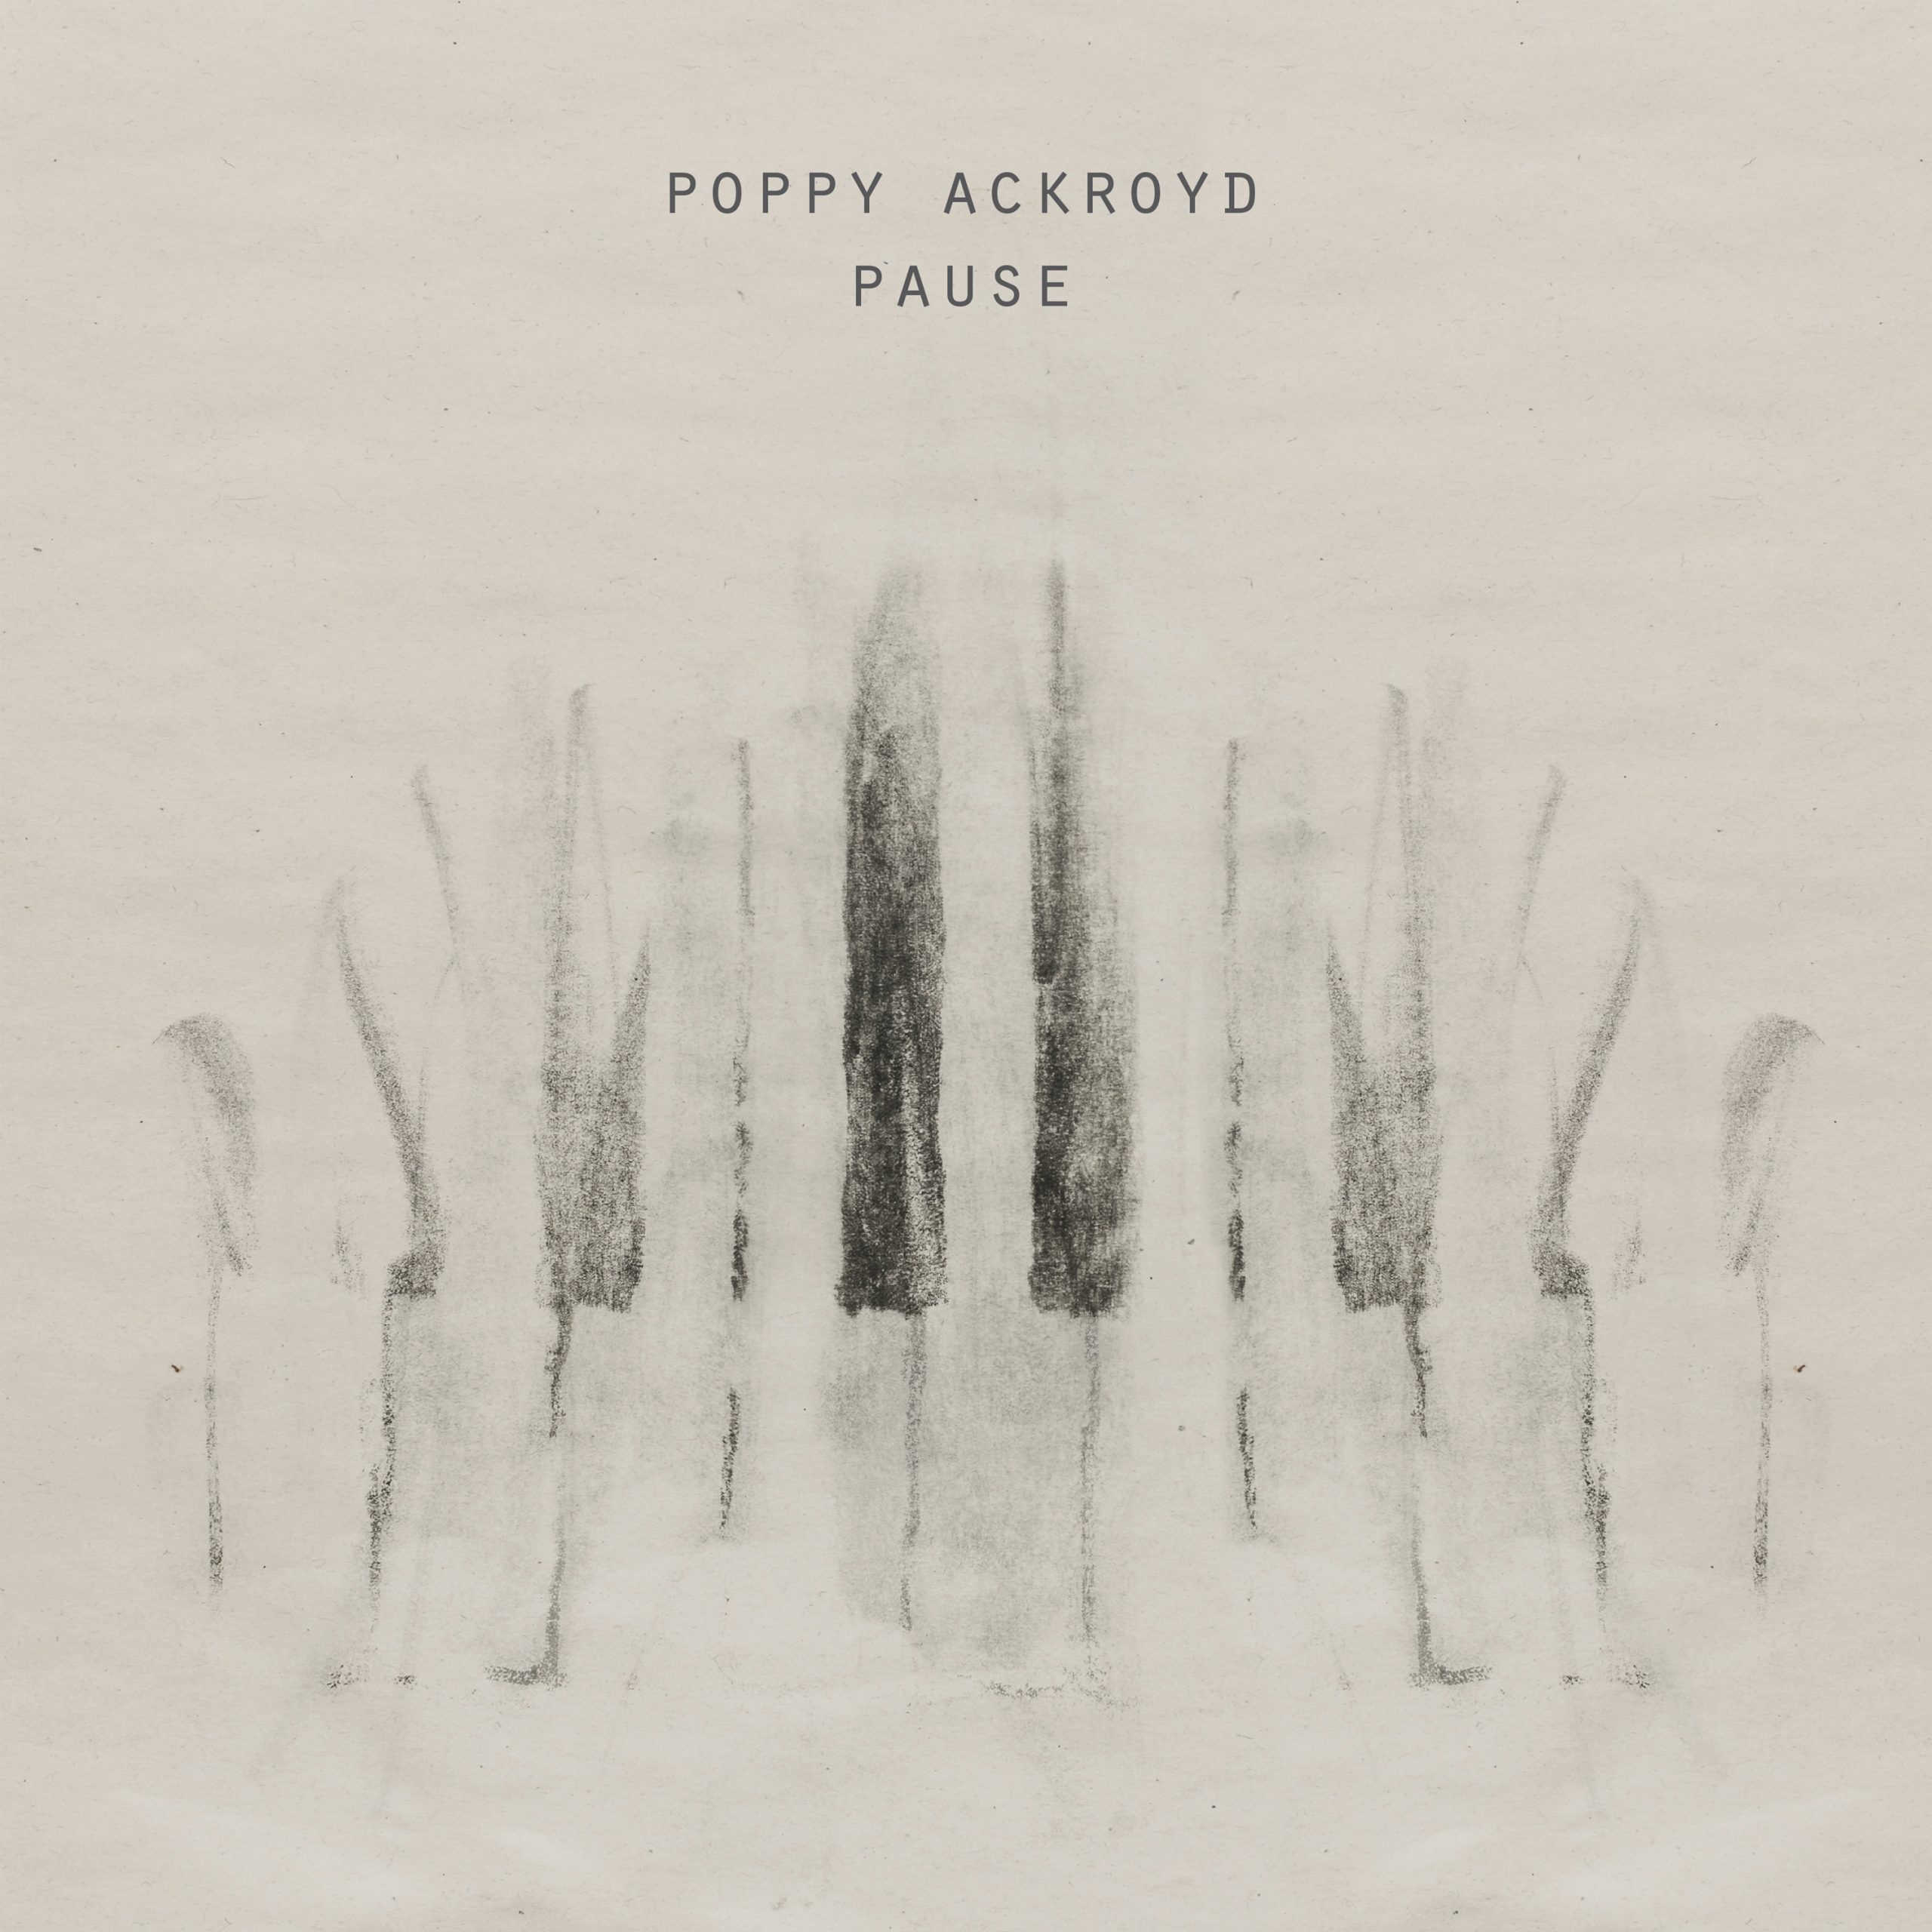 Poppy (2021) Movie Review from Eye for Film